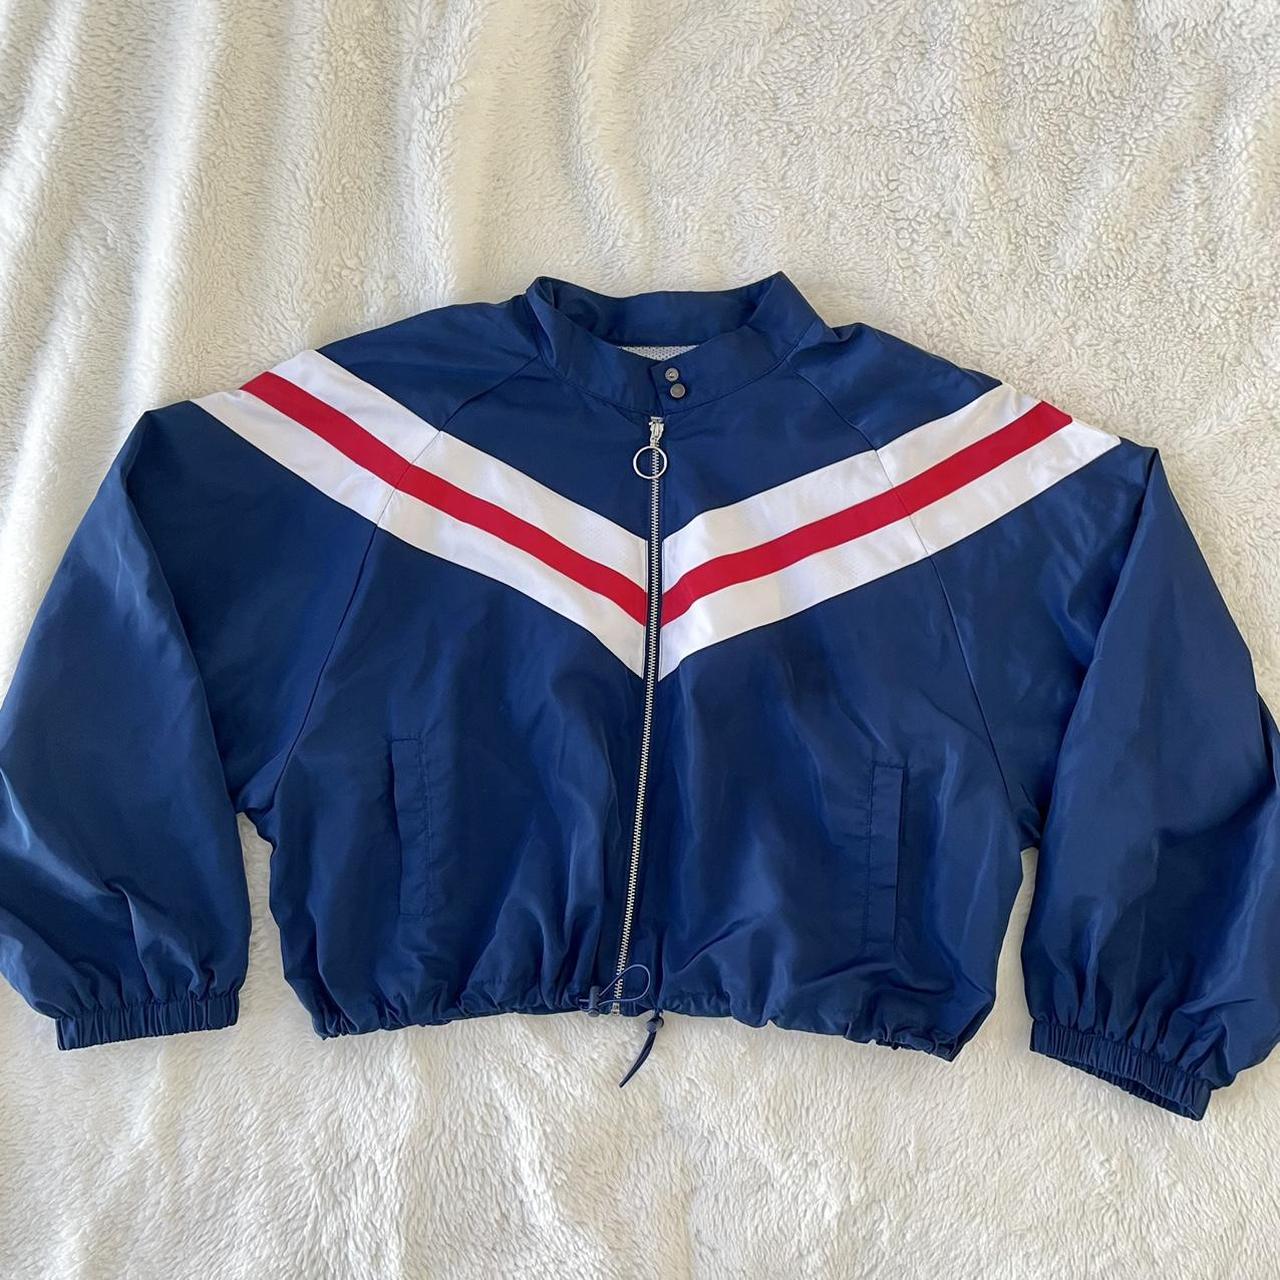 Women's Navy and Red Jacket | Depop